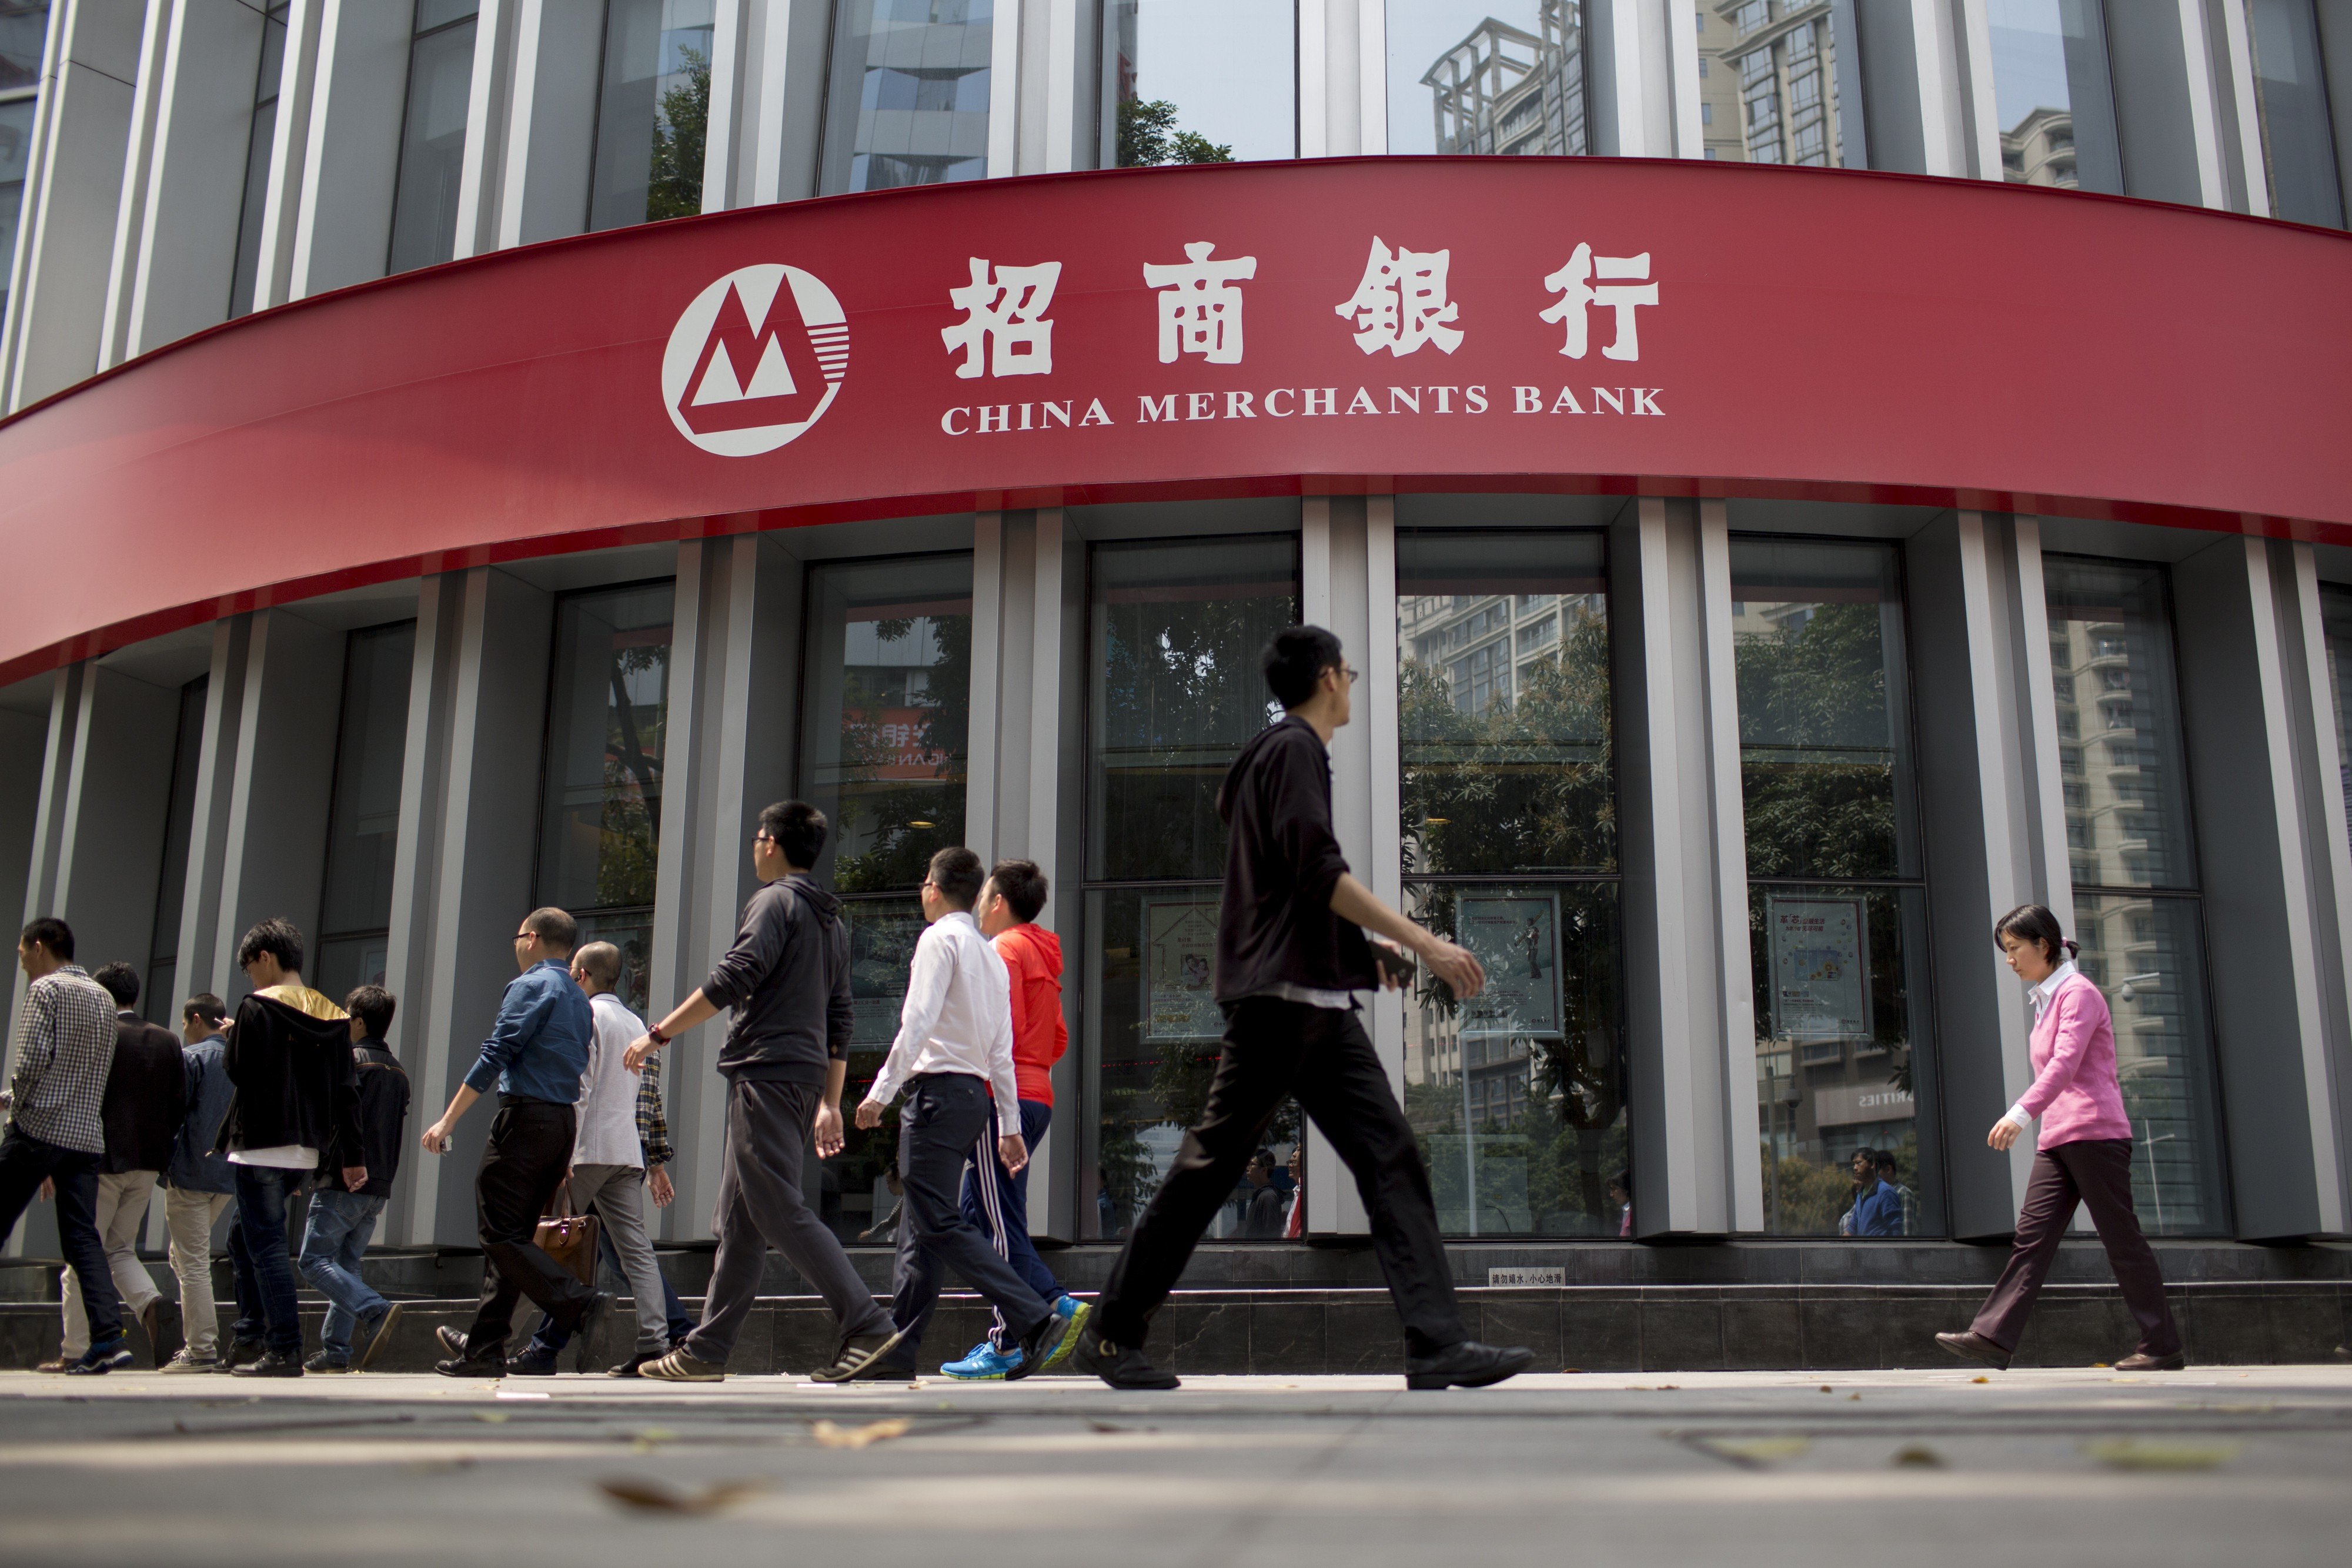 A China Merchants Bank branch in Guangzhou, in China’s southern Guangdong province. On Friday, the lender reported an interim result in line with expectations. Photo: Bloomberg